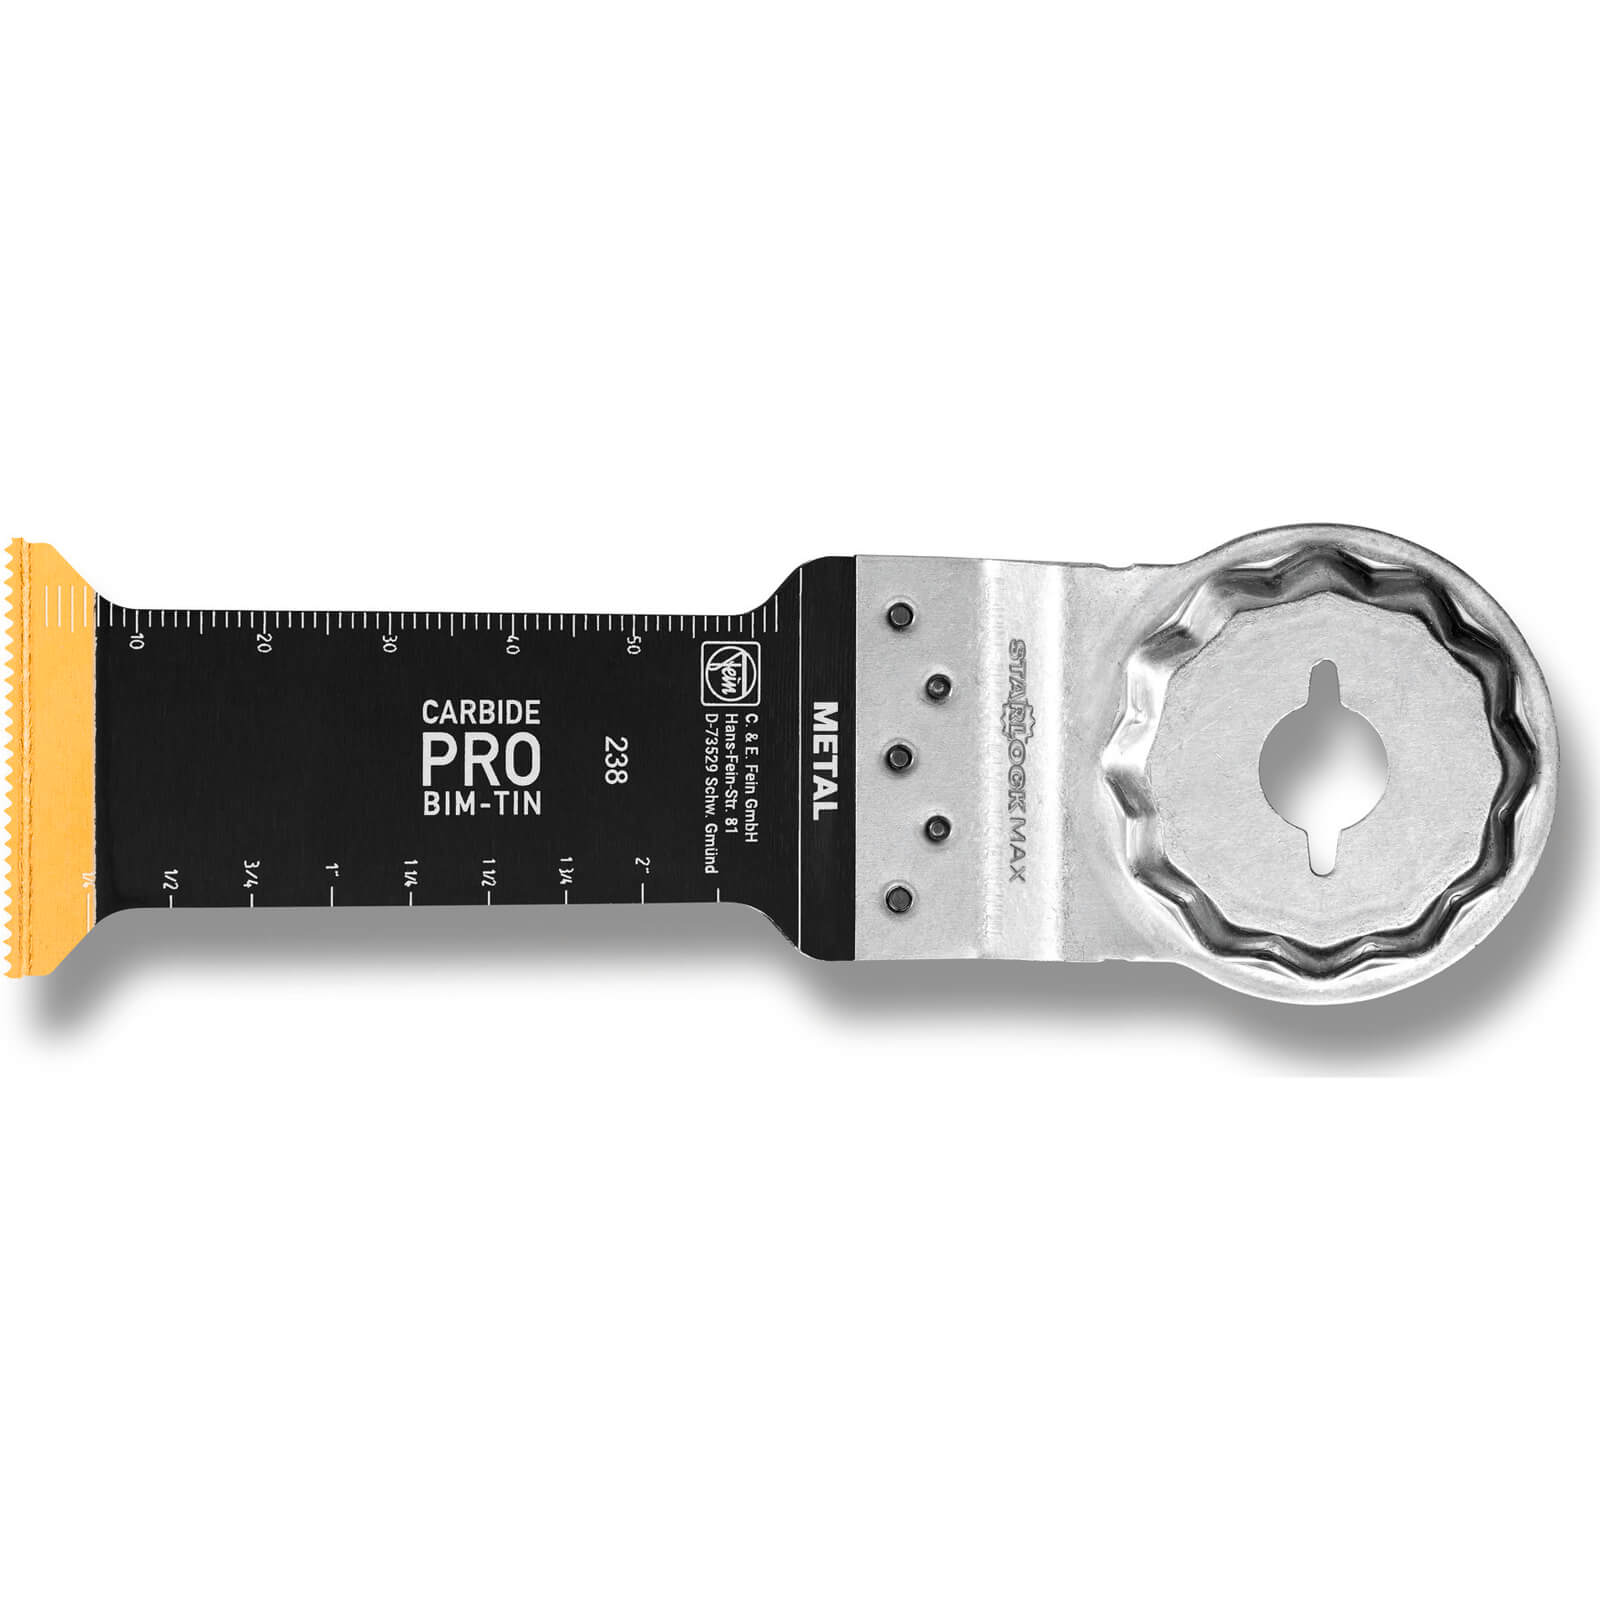 Image of Fein E-Cut Carbide Pro Starlock Max Oscillating Multi Tool Plunge Saw Blade 32mm Pack of 10